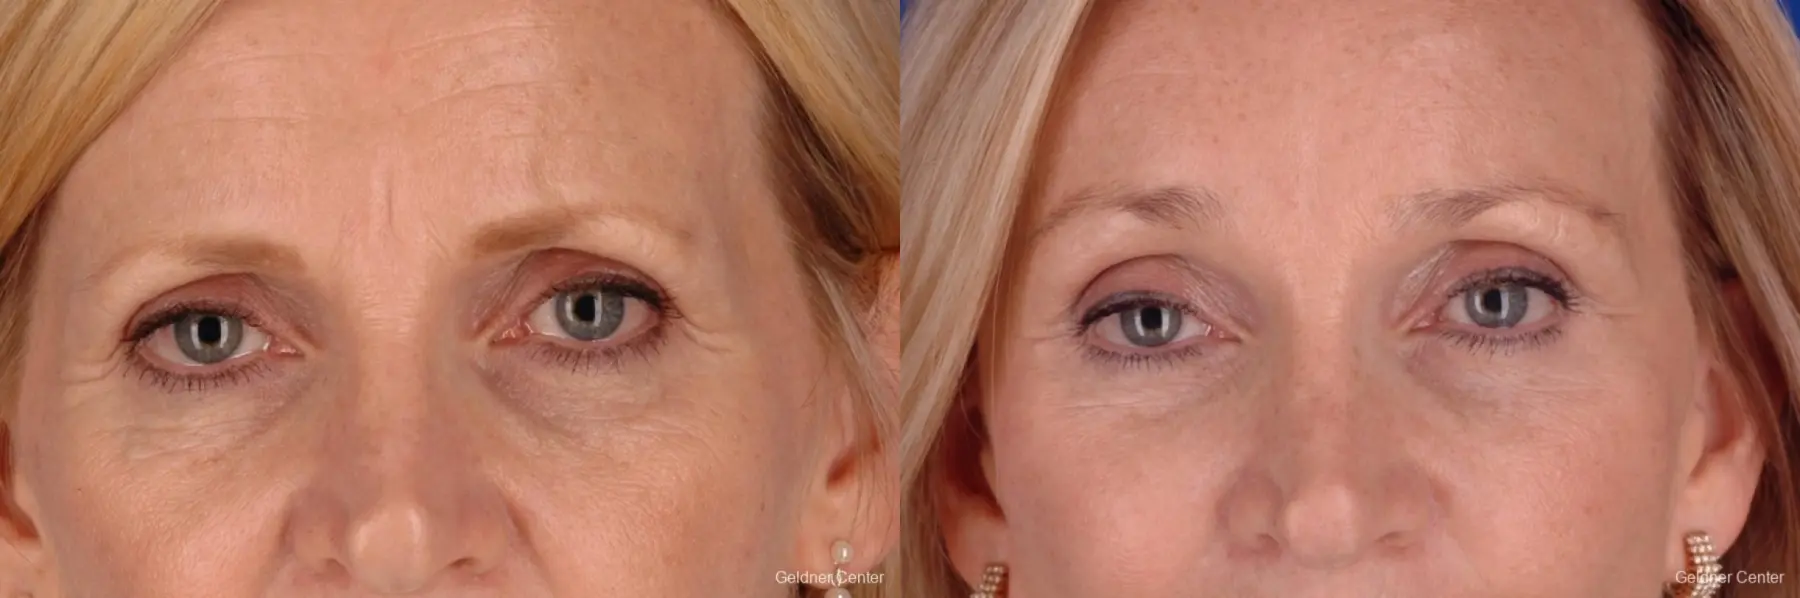 Chicago Eyelid Lift 2287 - Before and After